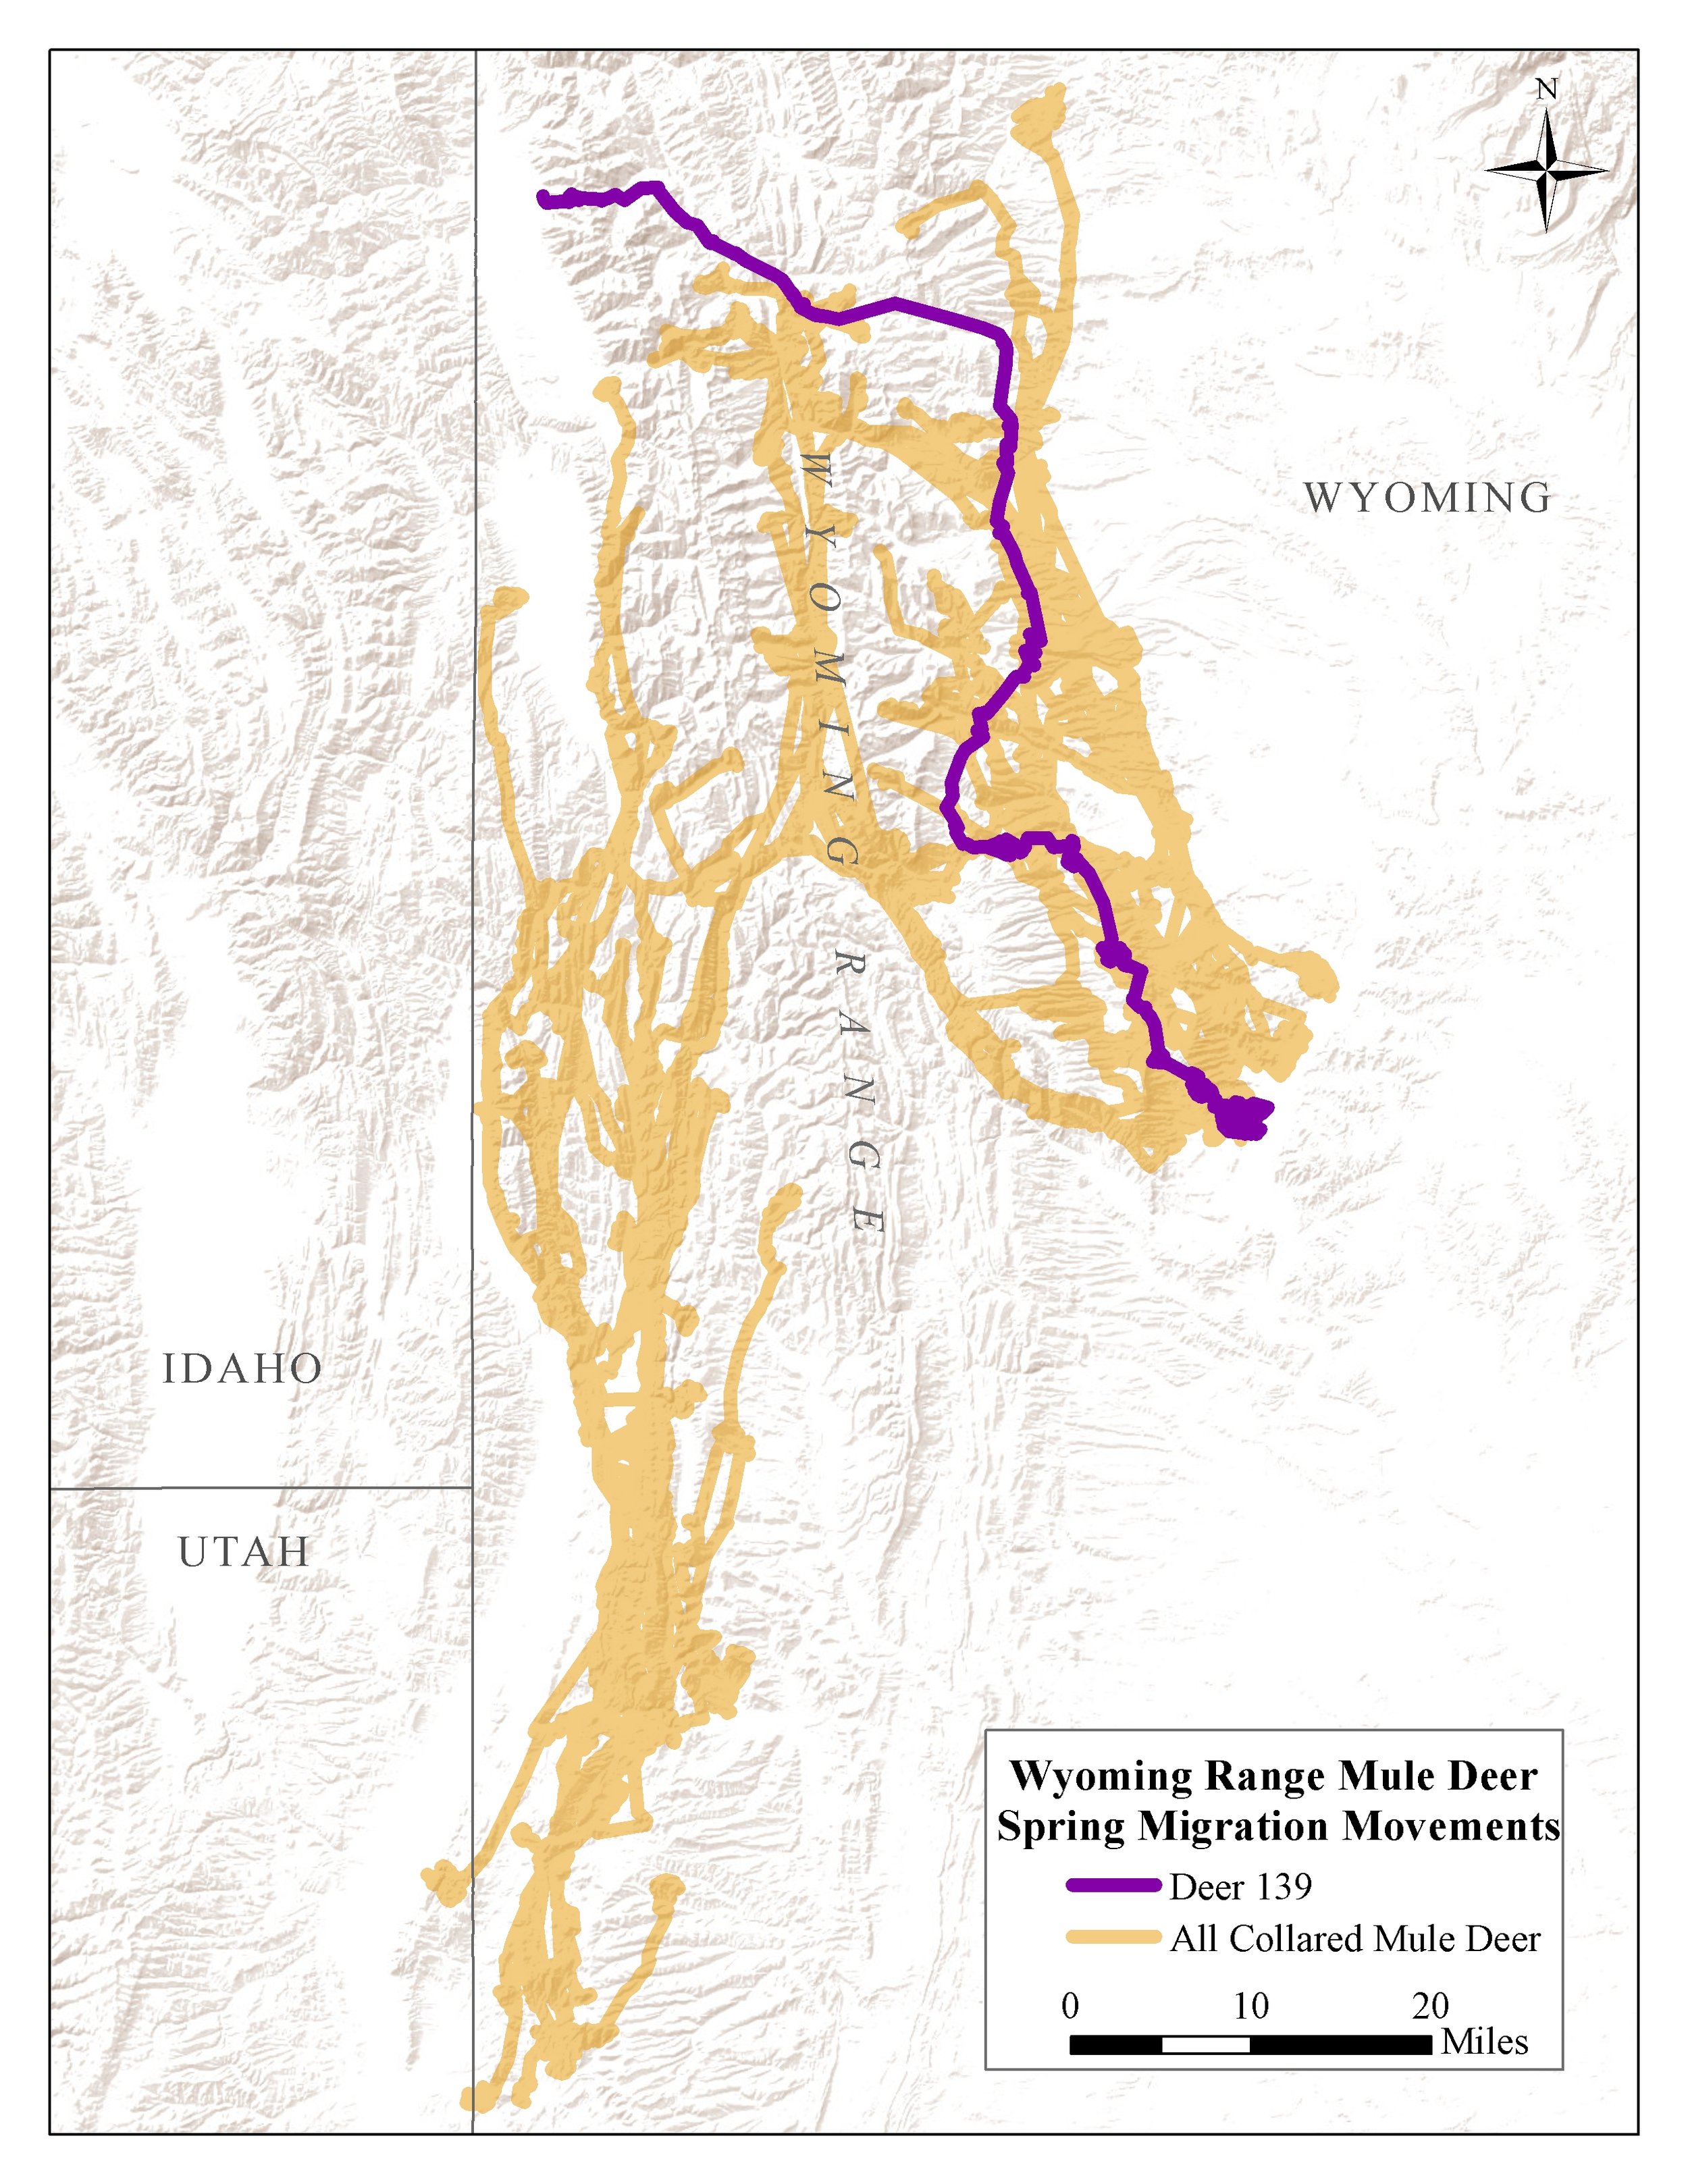 In spring 2016, dozens of collared mule deer (orange lines) migrated into the high mountains of western Wyoming. Deer 139 (purple line) traveled 85 miles through the Wyoming and Salt River Ranges.